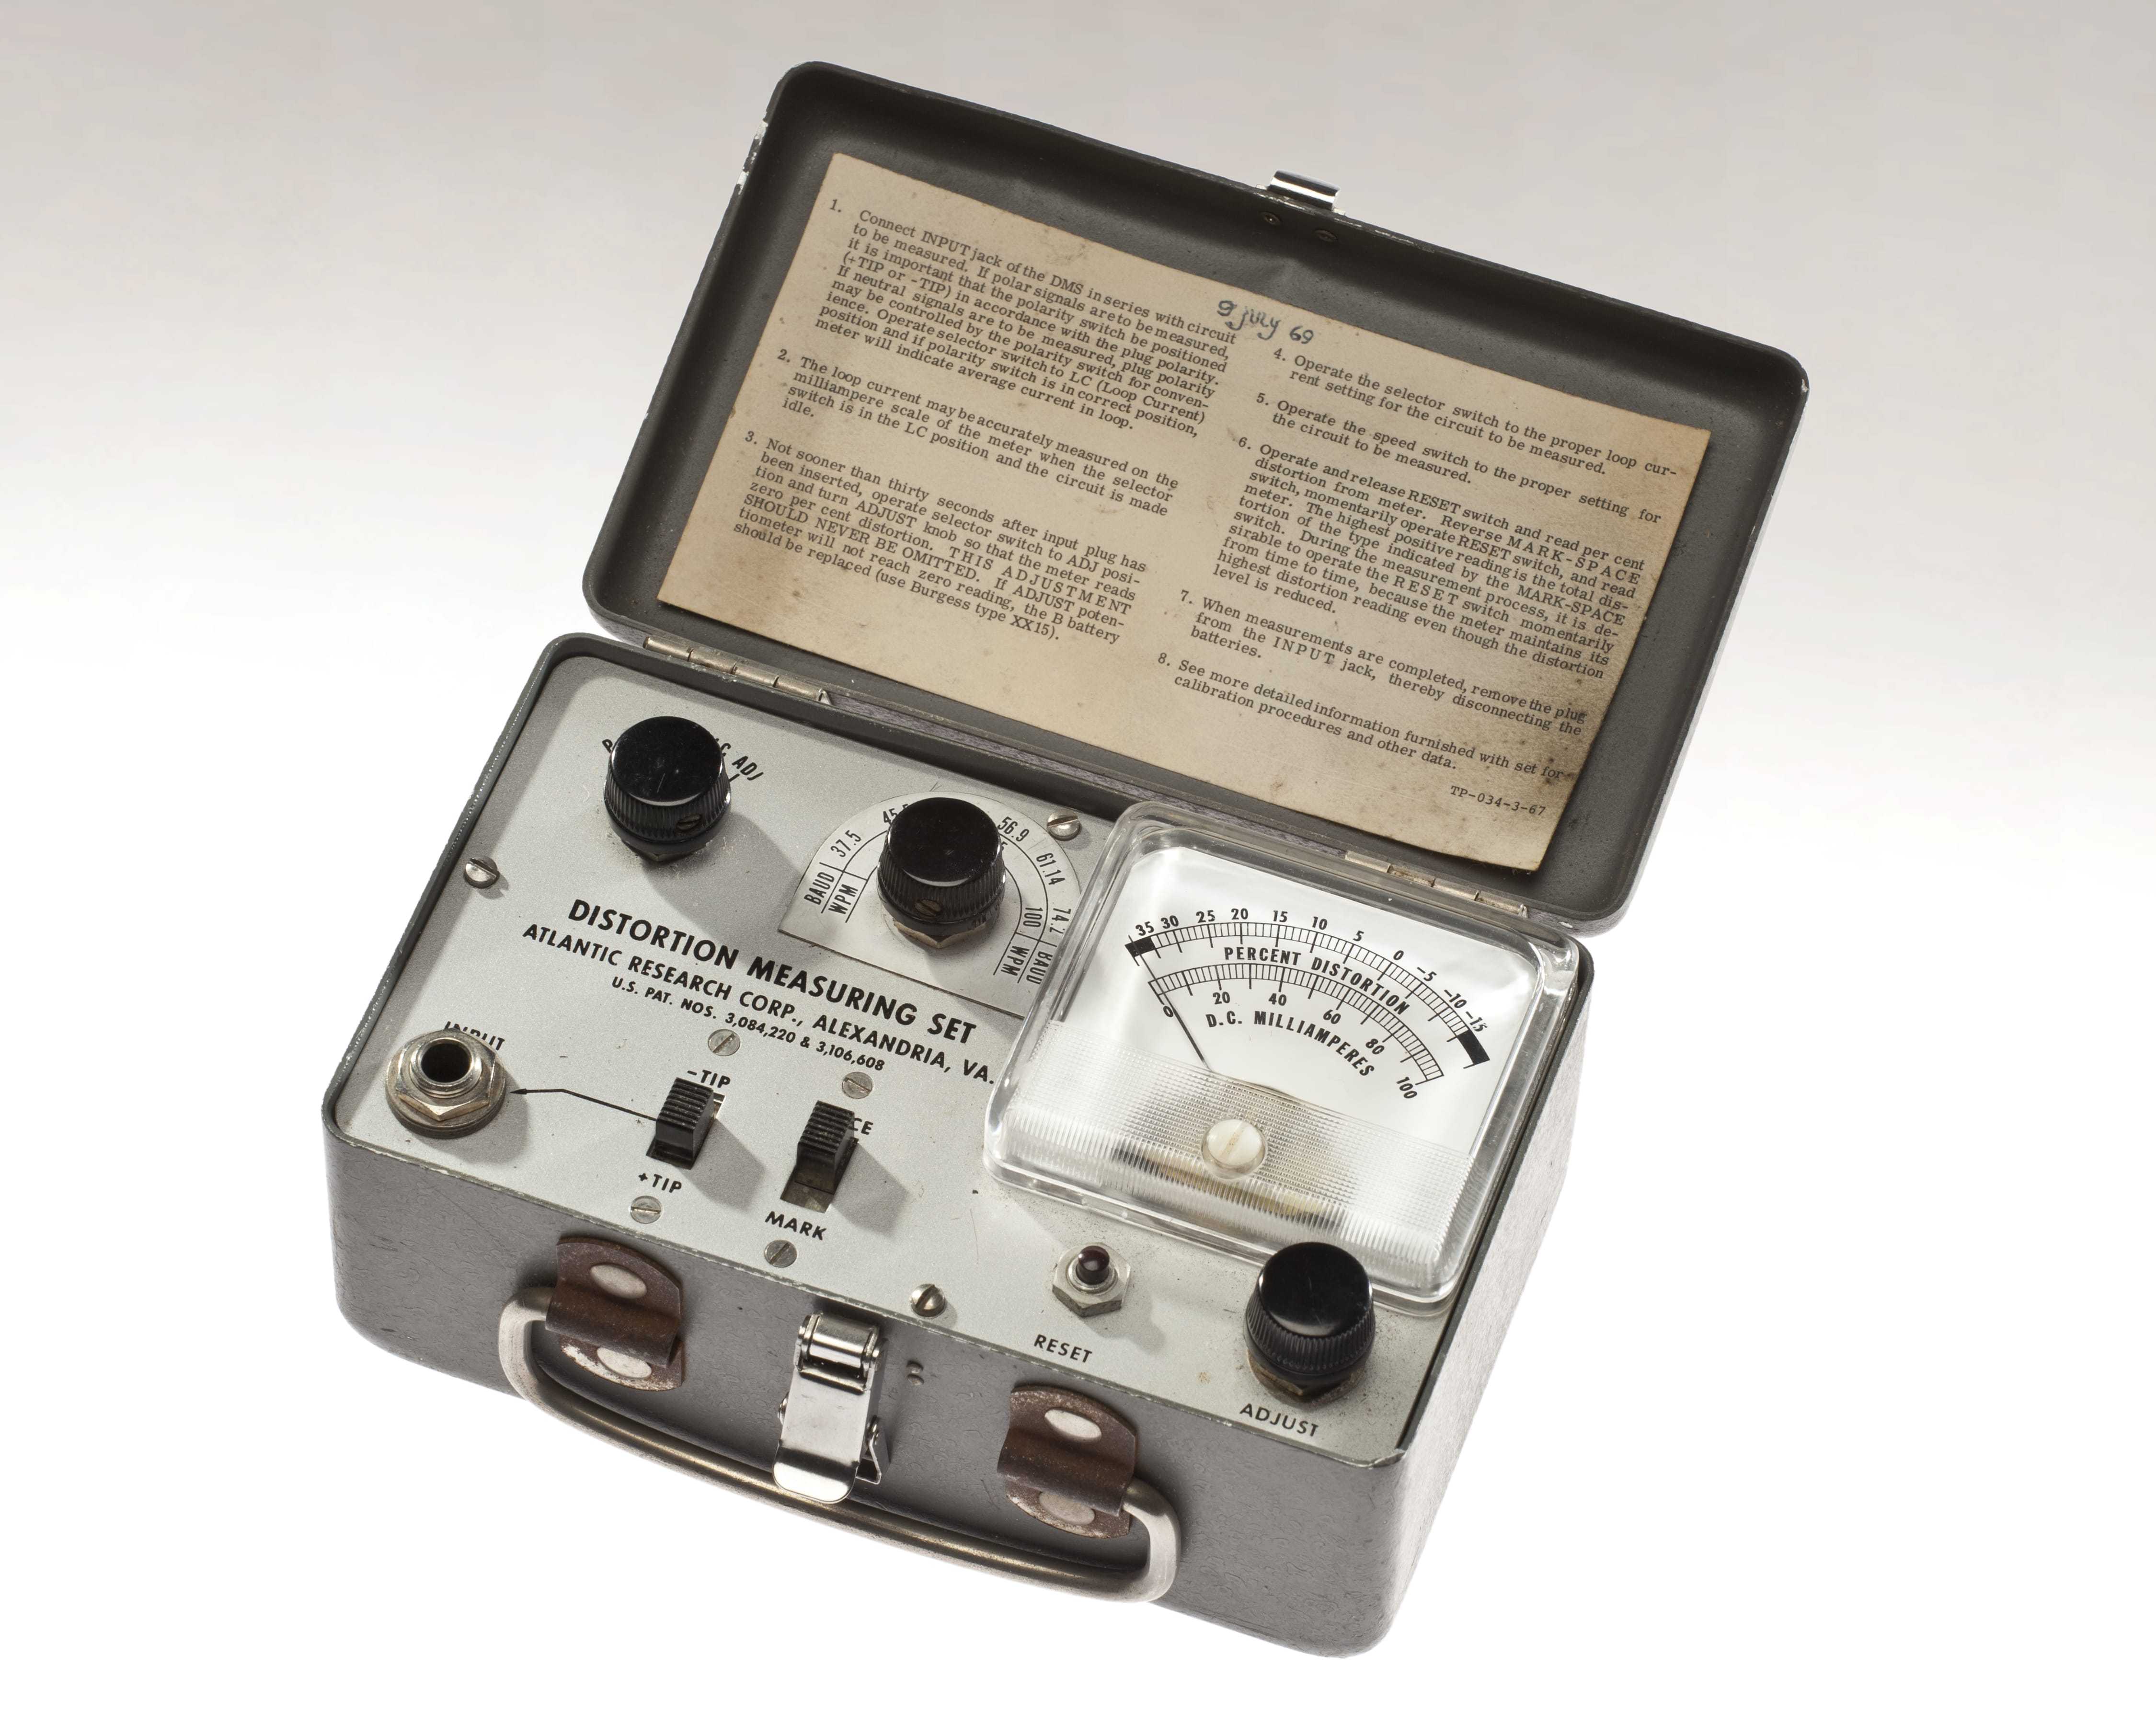 An open metal box containing instructions for its use, various switches and dials, and a distortion level meter